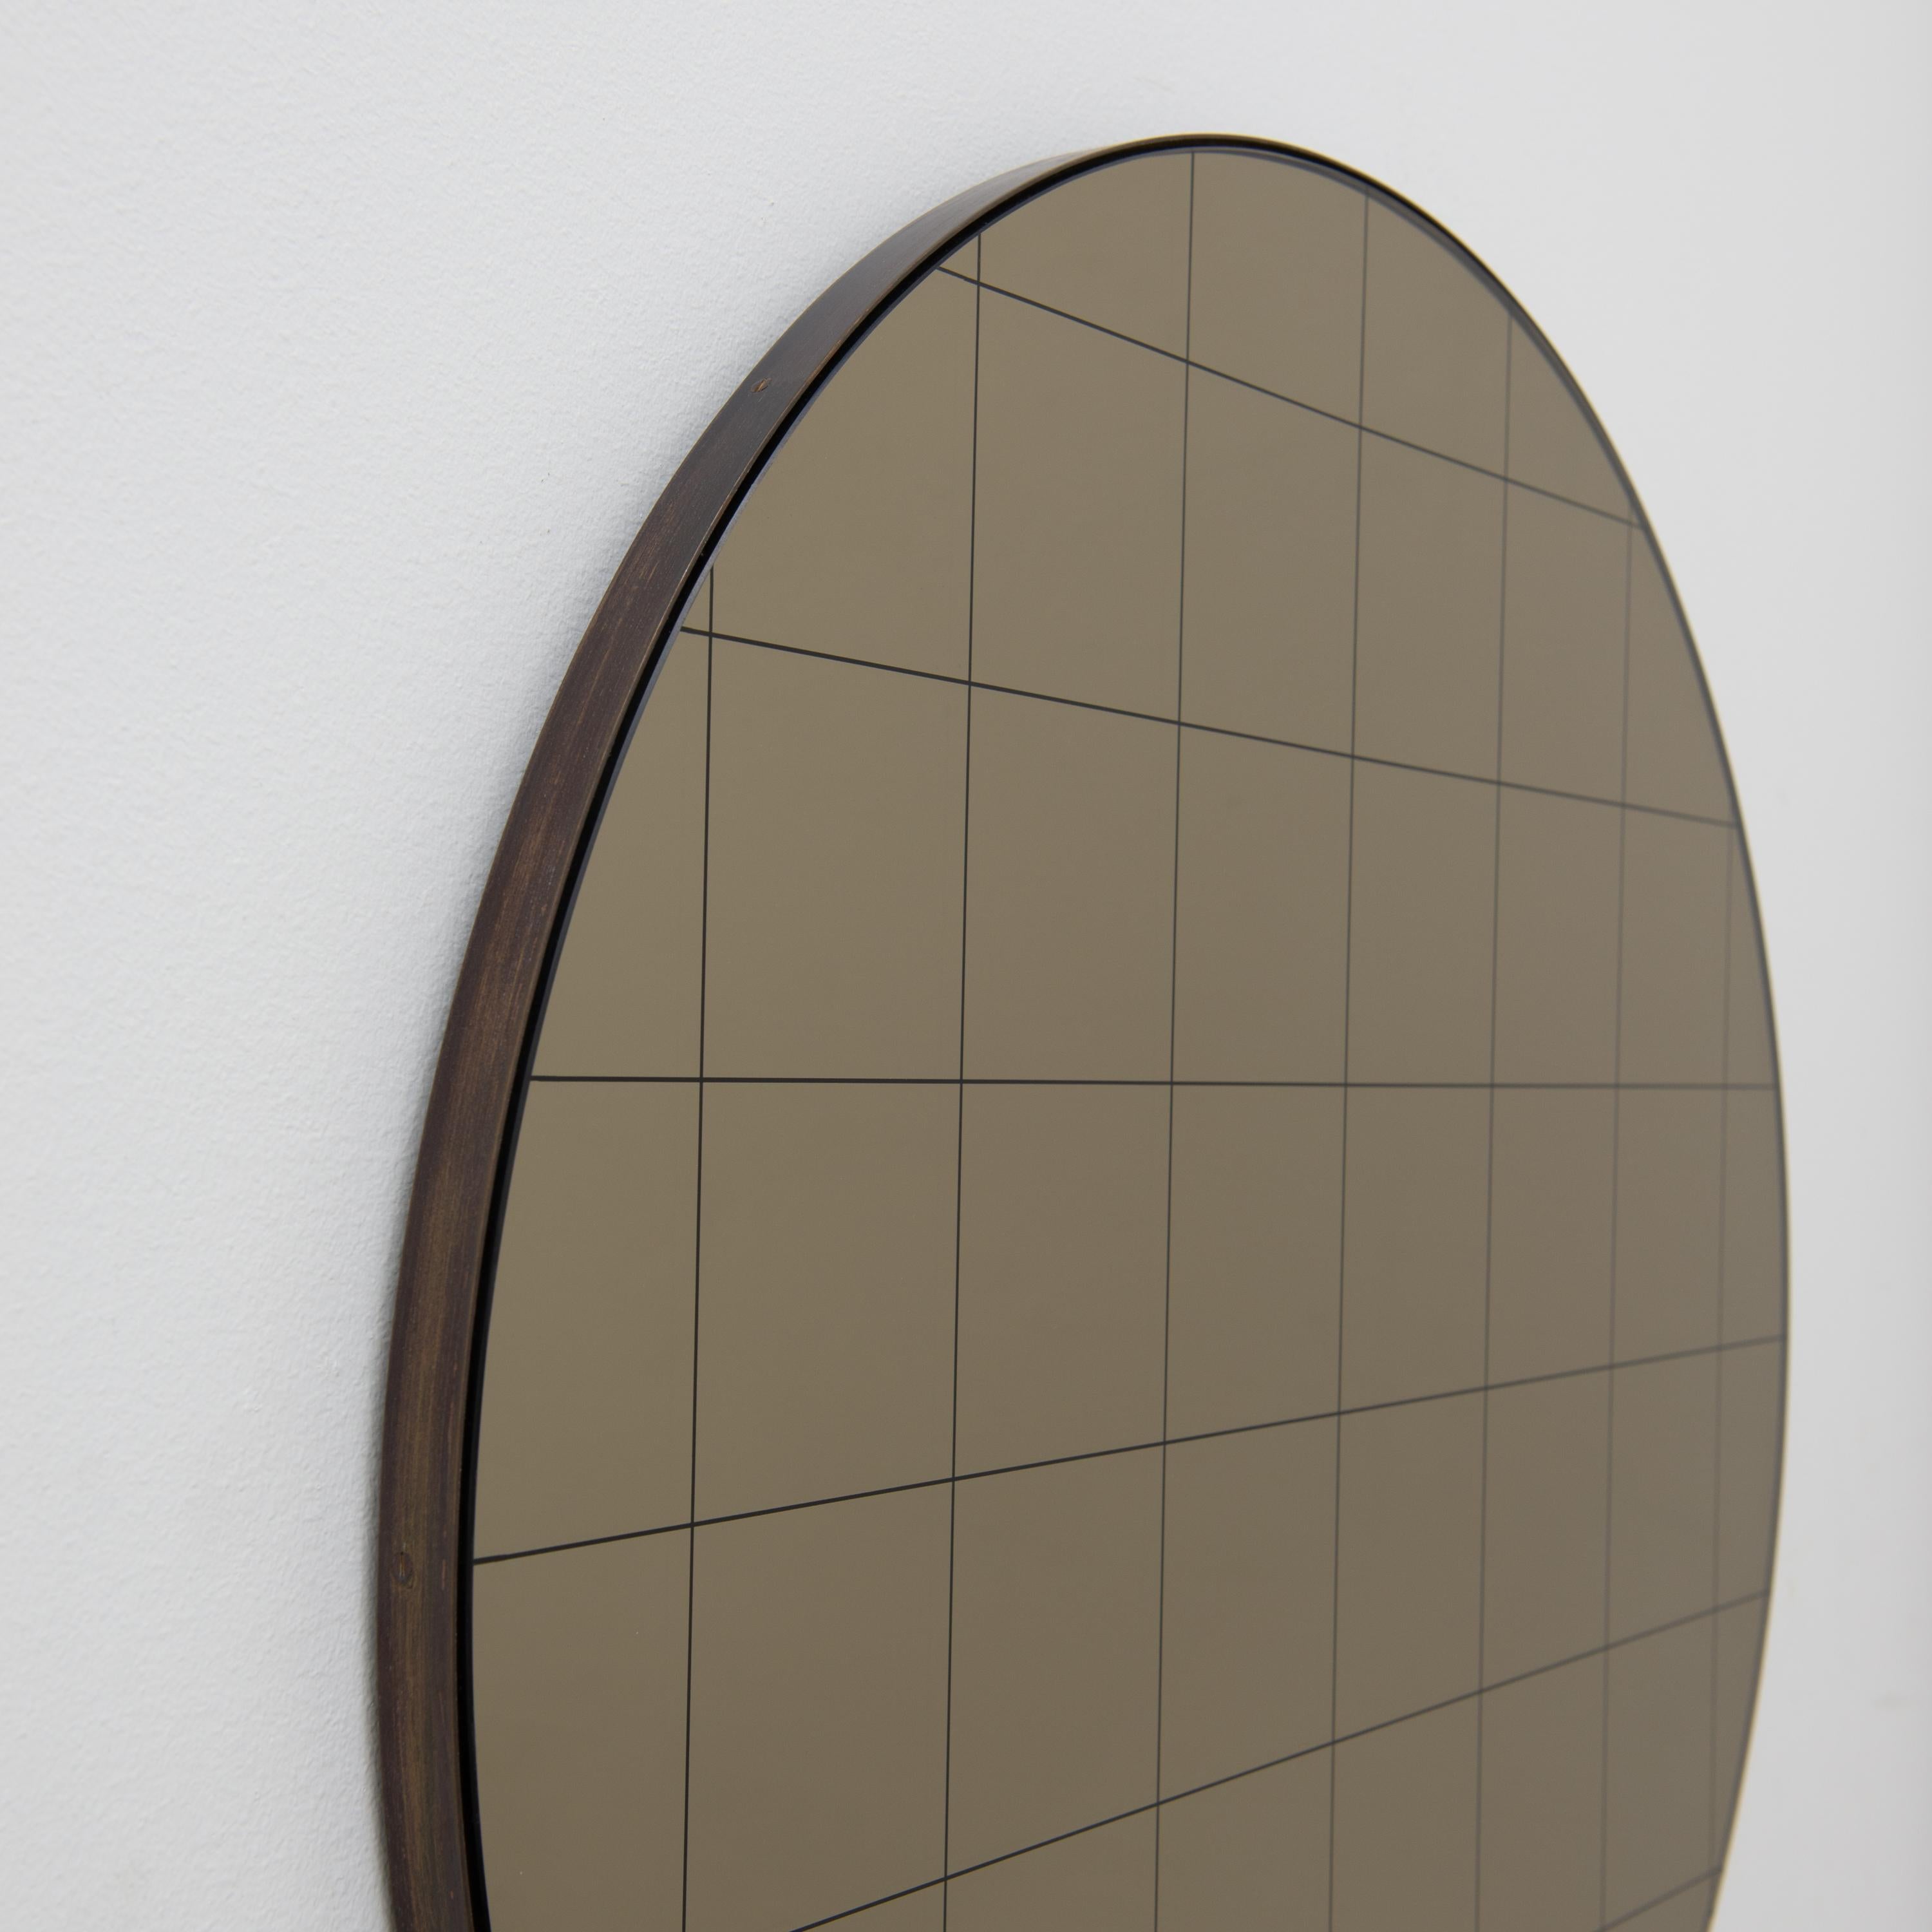 Patinated In Stock Orbis Bronze Round Mirror with Patina Frame, Medium For Sale